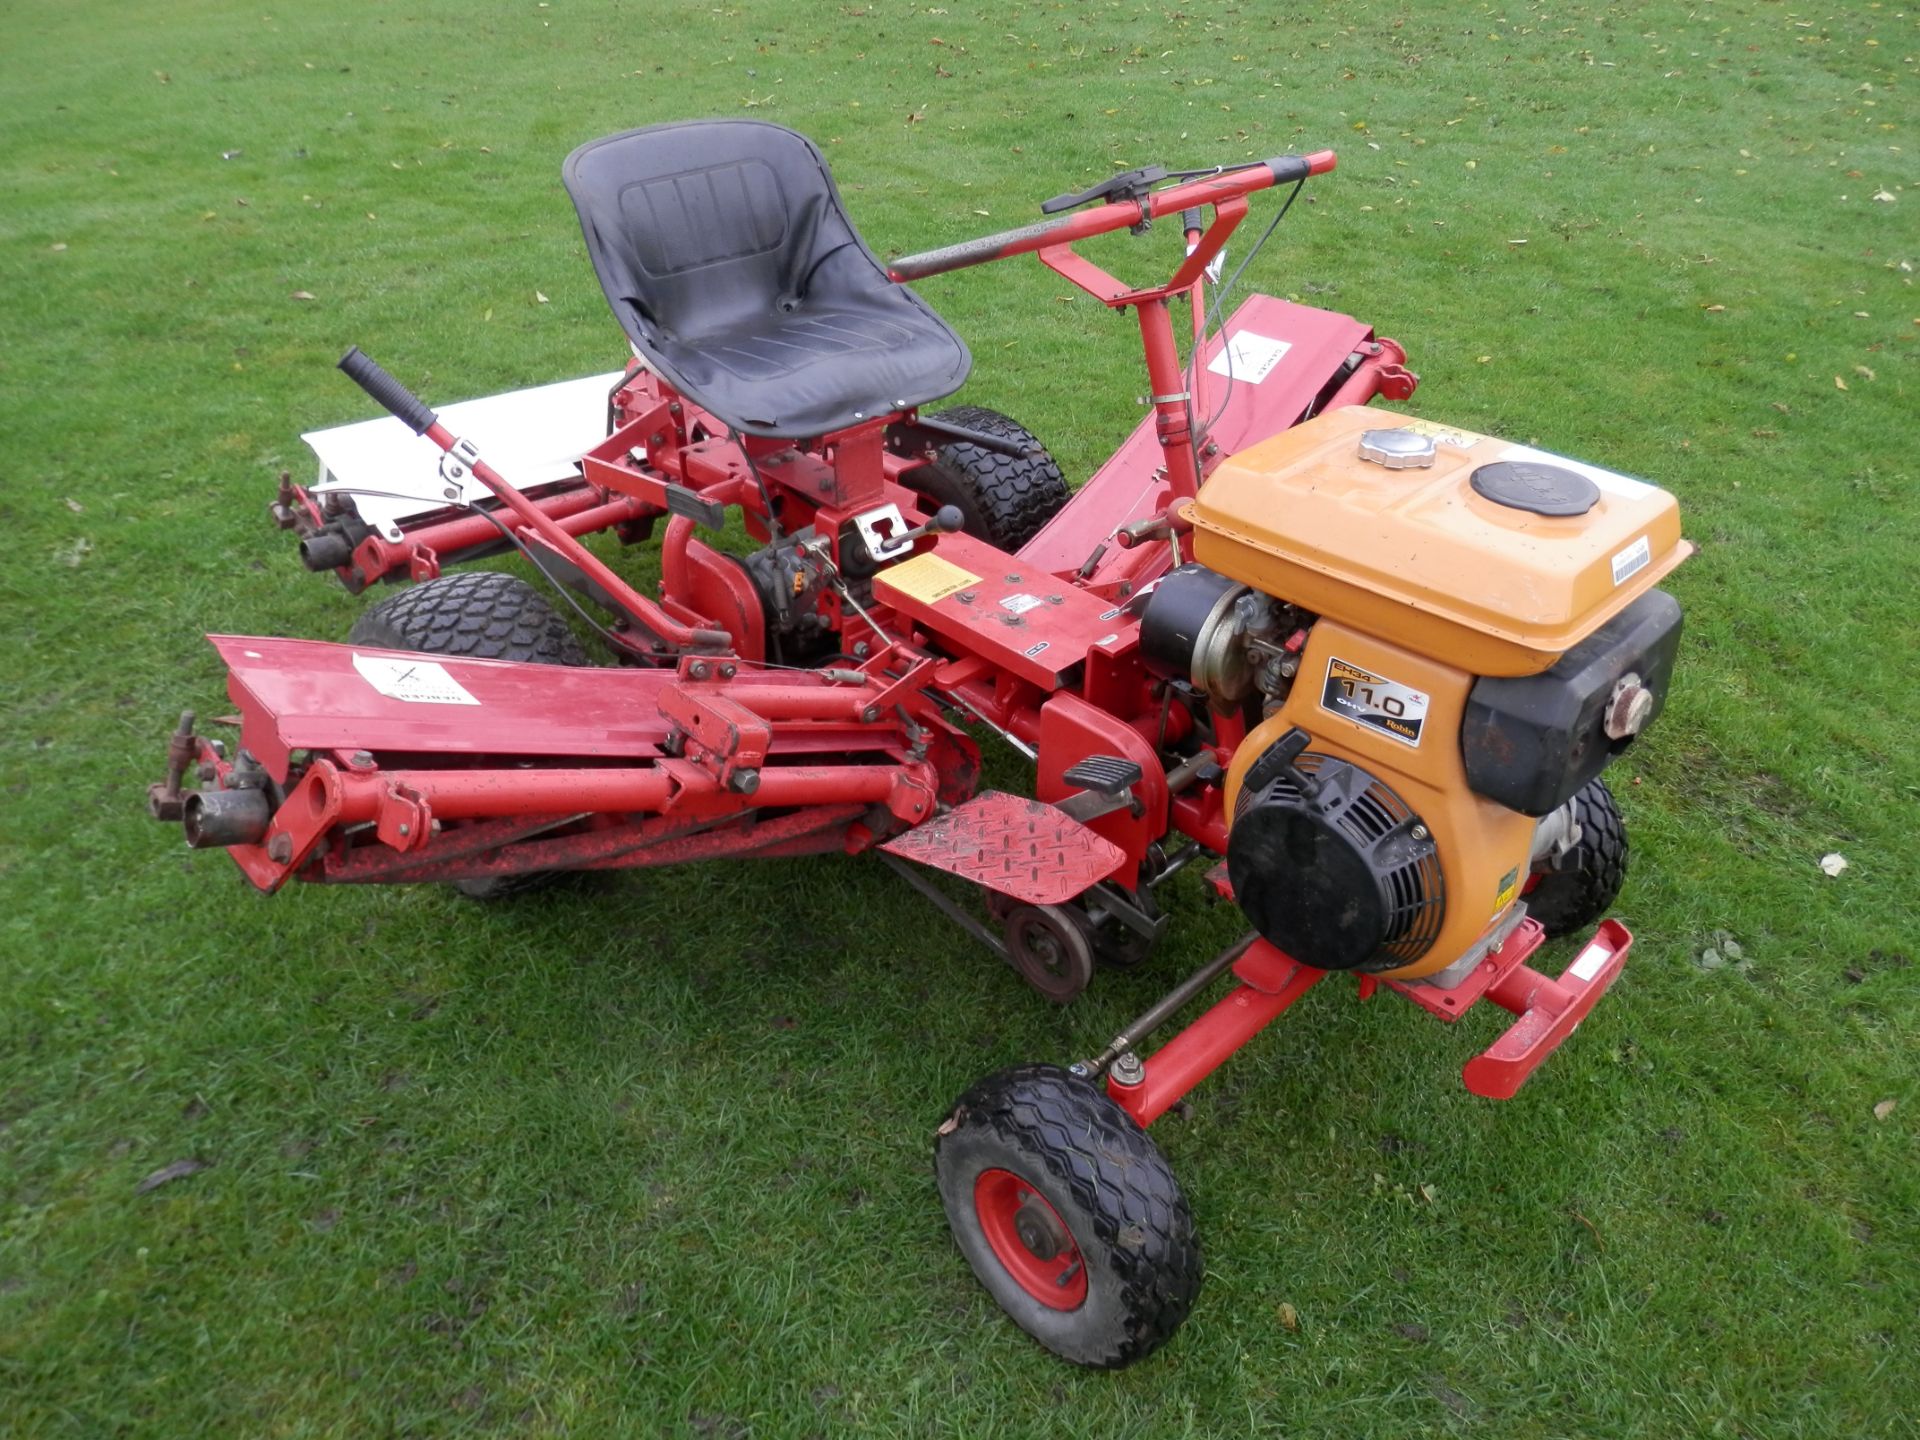 ALL WORKING SAXON TRIPLE MK2 RIDE ON MOWER, UPGRADED WITH GEARS, BRAKE PEDAL & DIFF LOCK.